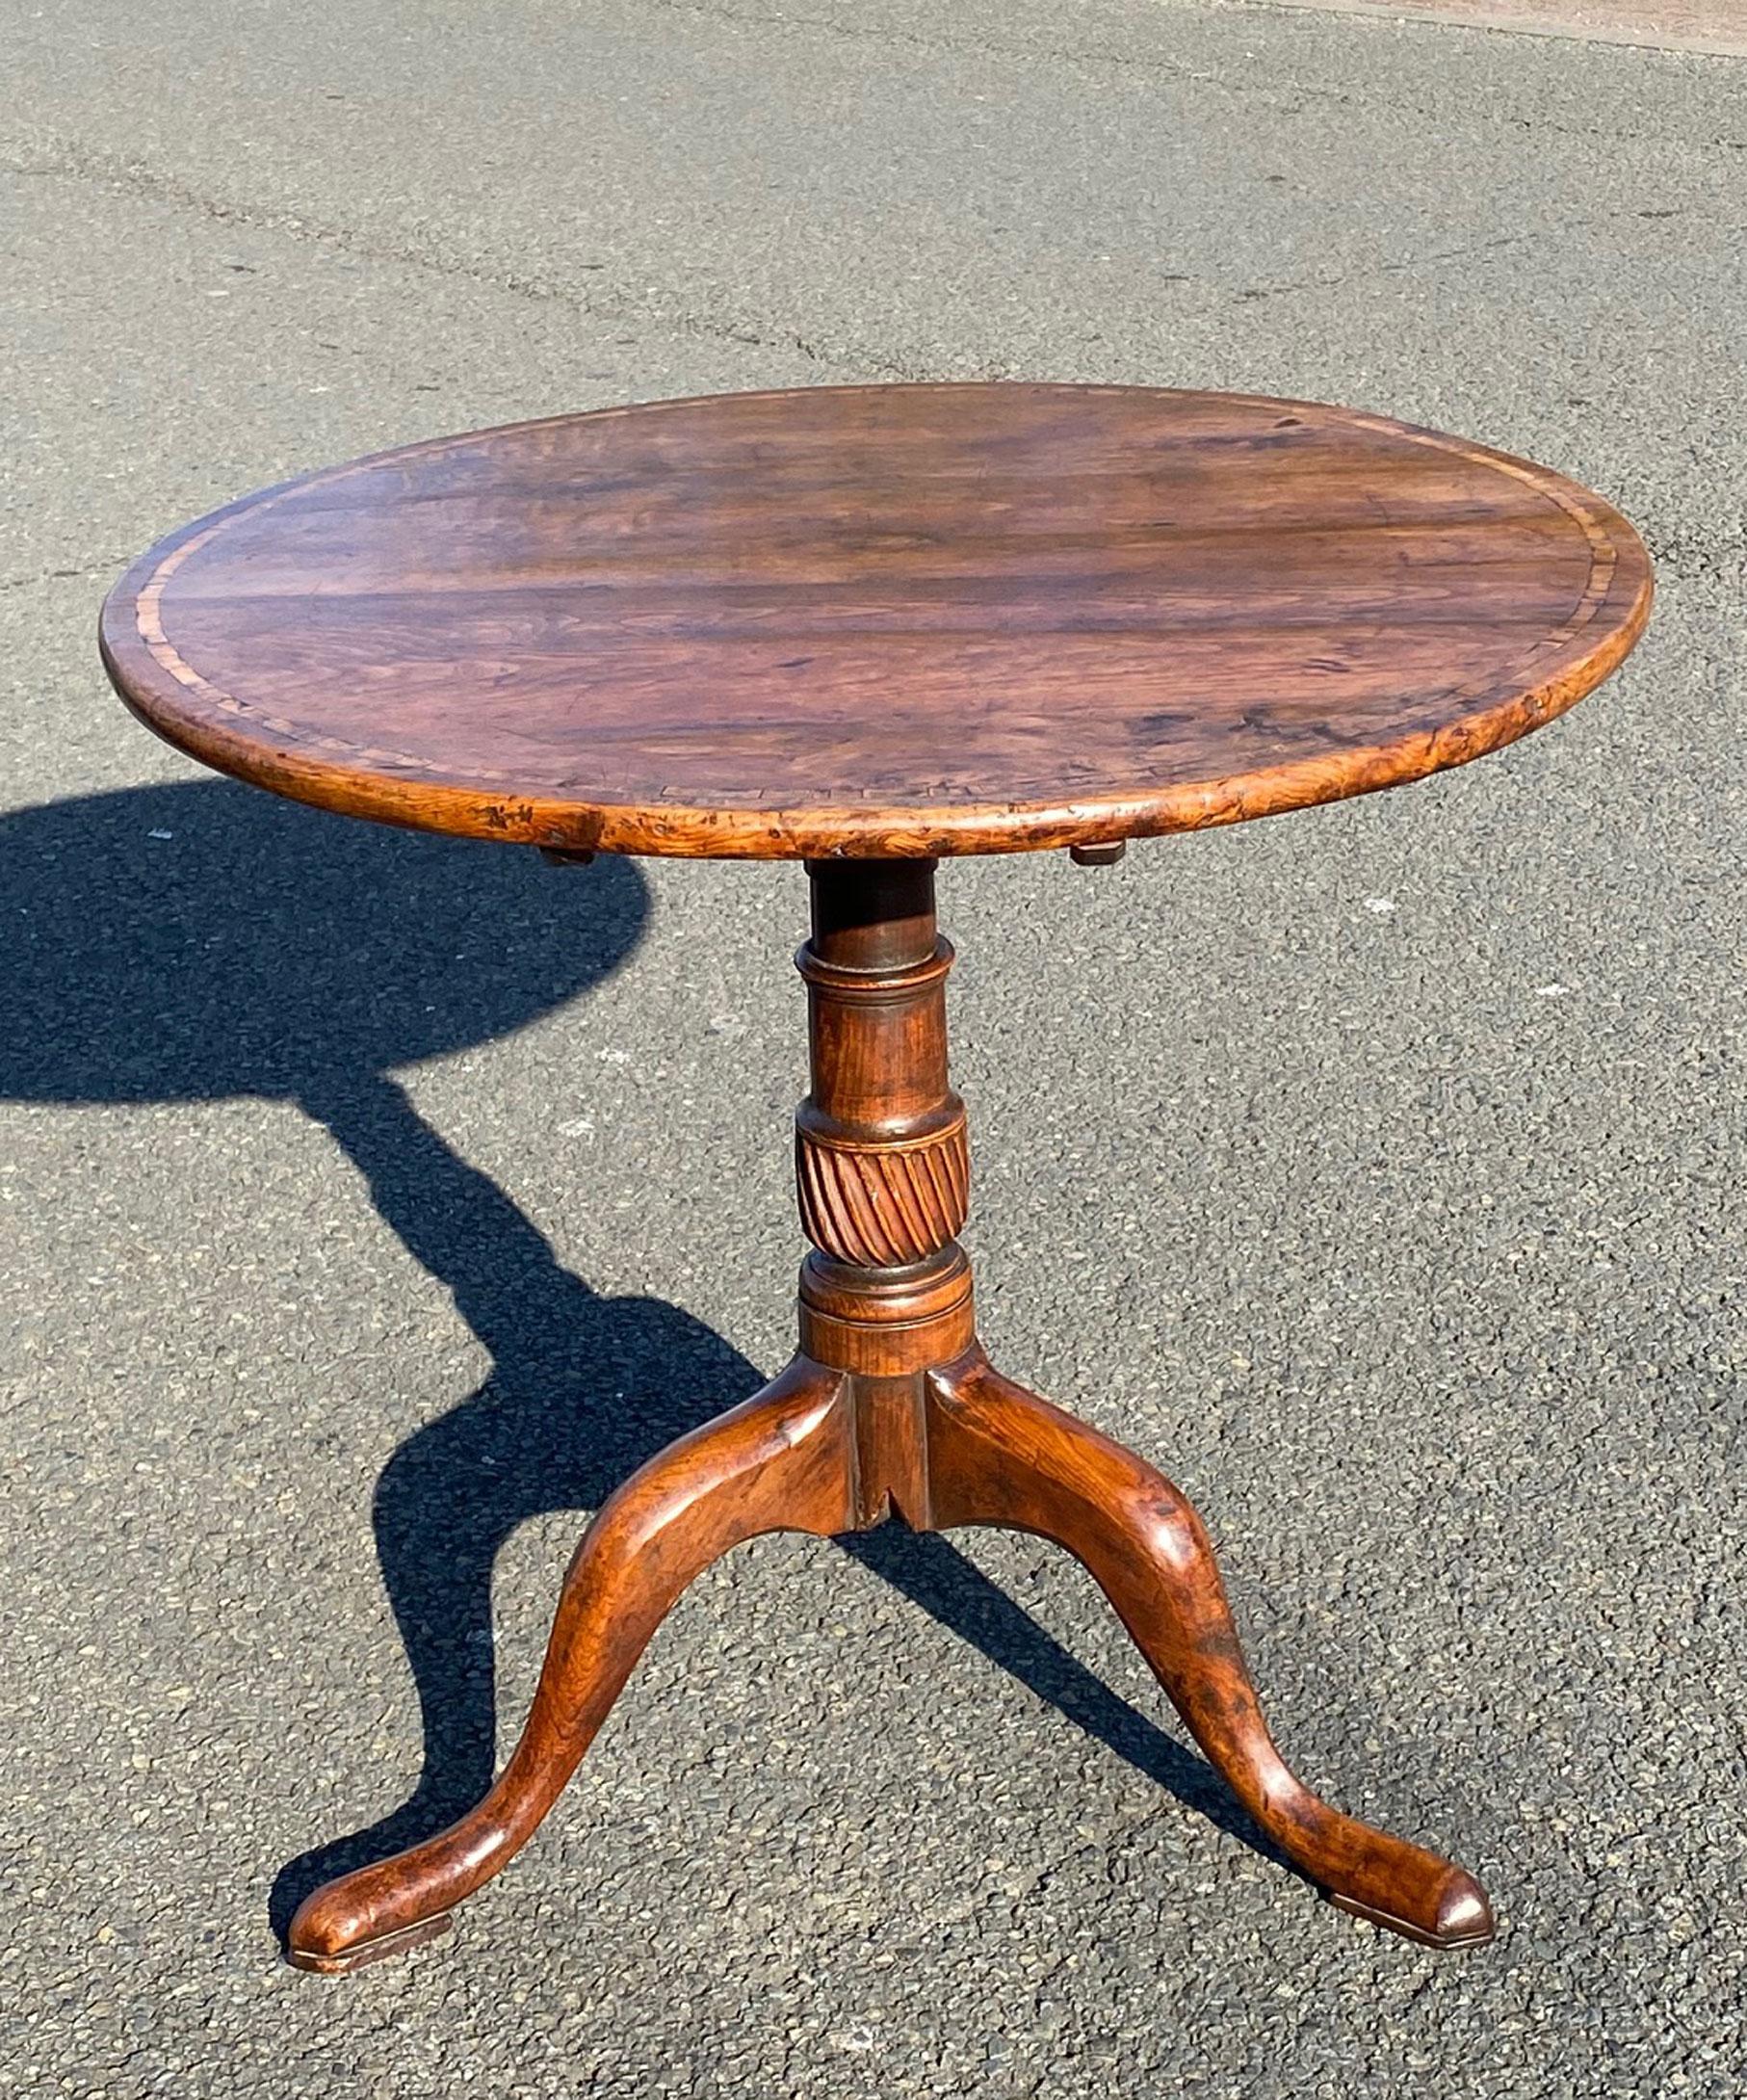 A beautifully patinated Georgian yew wood vernacular tripod table; the well figured tilt-top crossbanded in holly above a wrythen turned stem which is raised on well drawn cabriole legs terminating in shaped pad feet.

This tripod table retains a